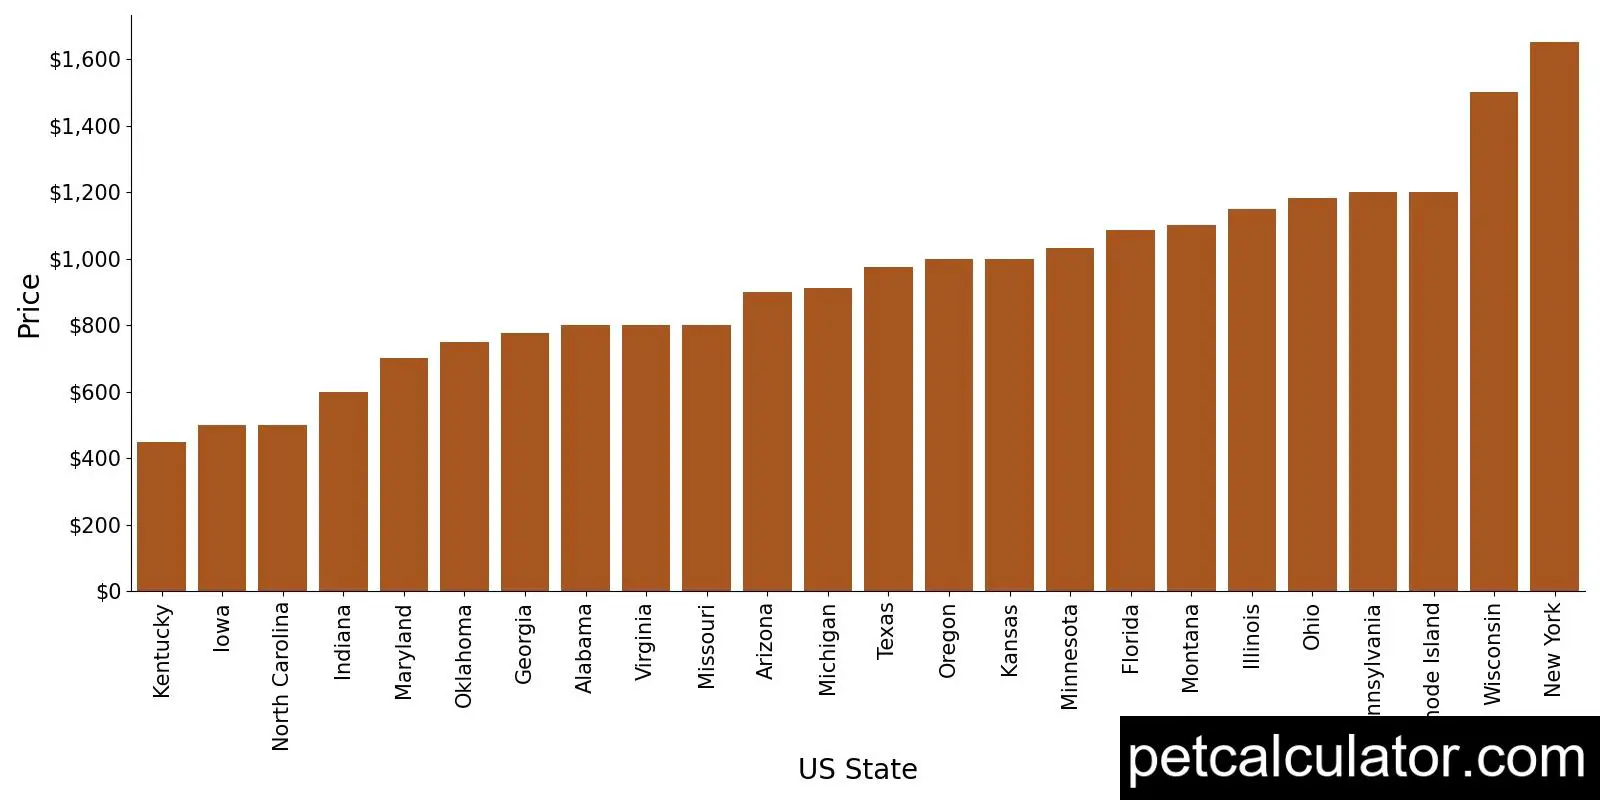 Price of English Setter by US State 